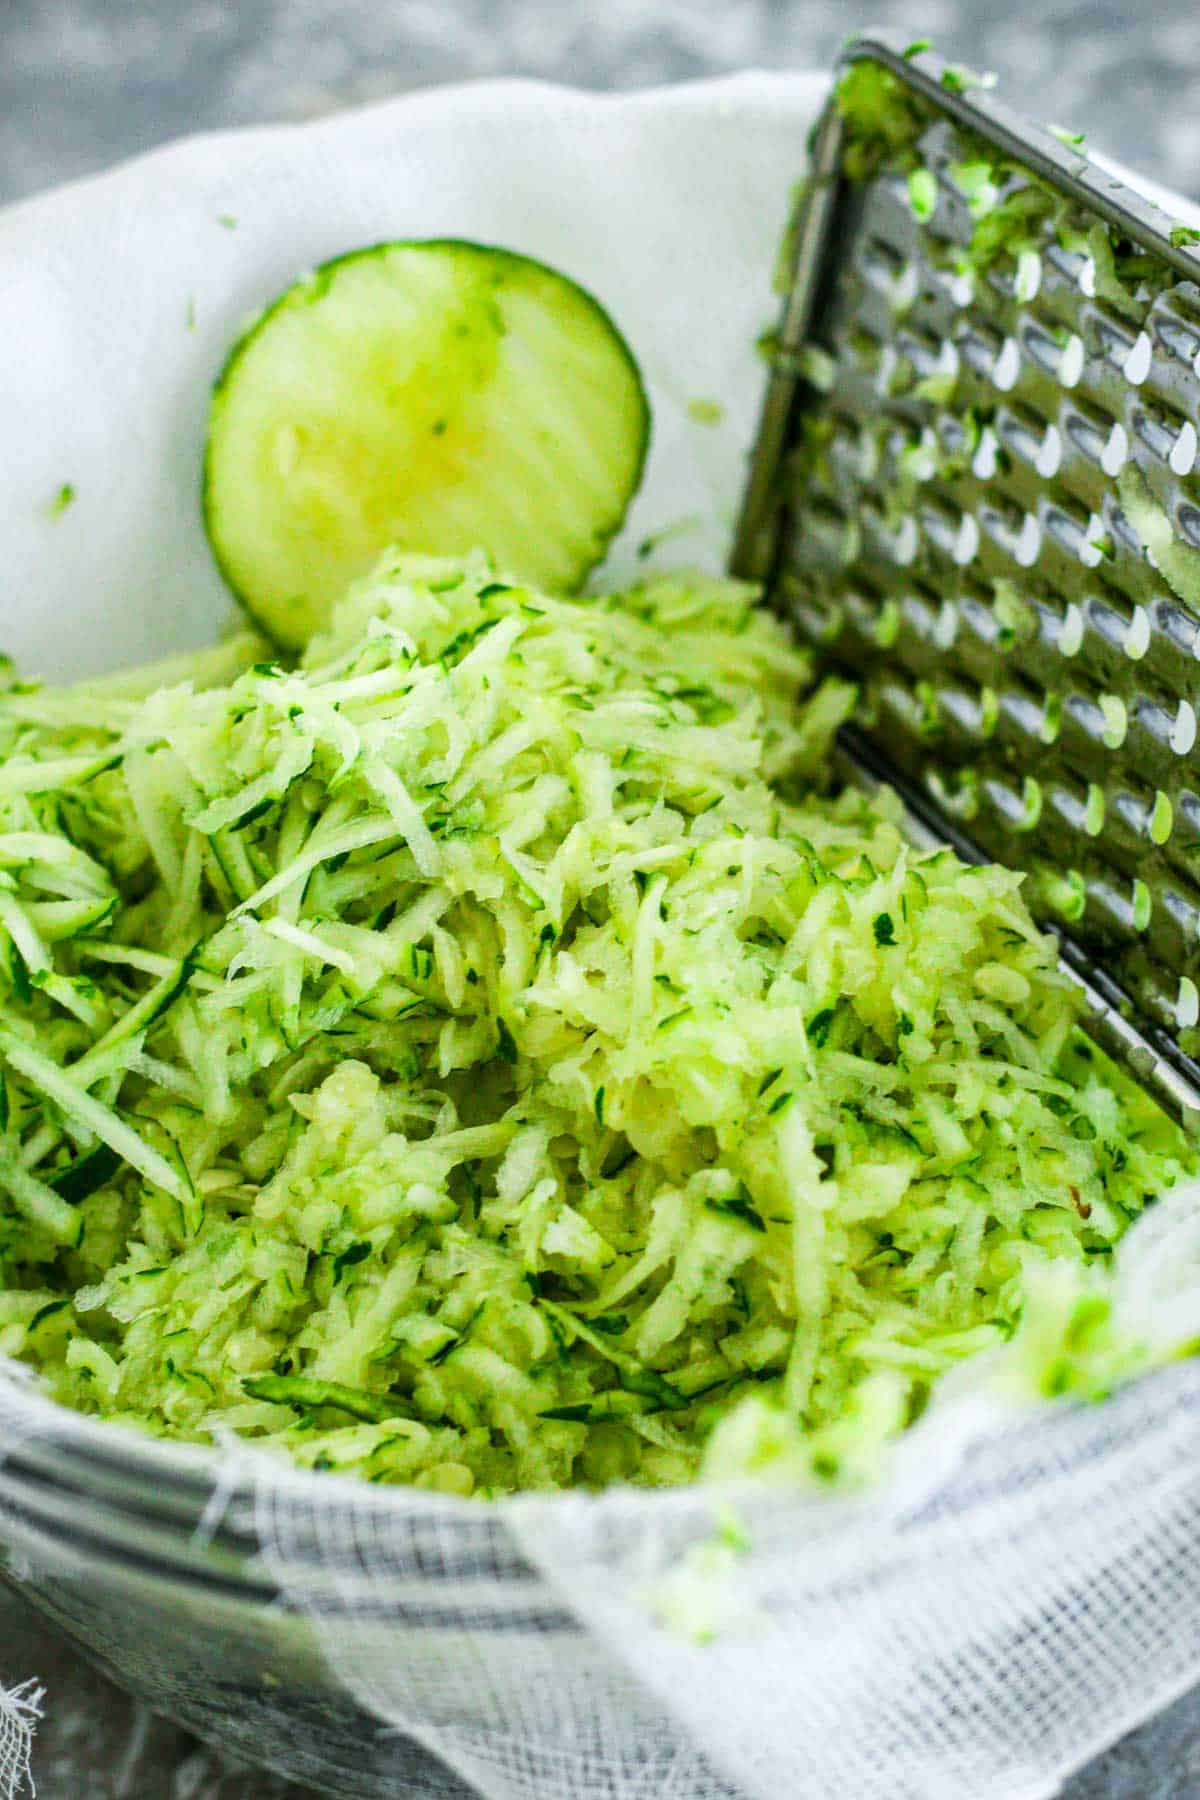 Grating zucchini on a bowl.